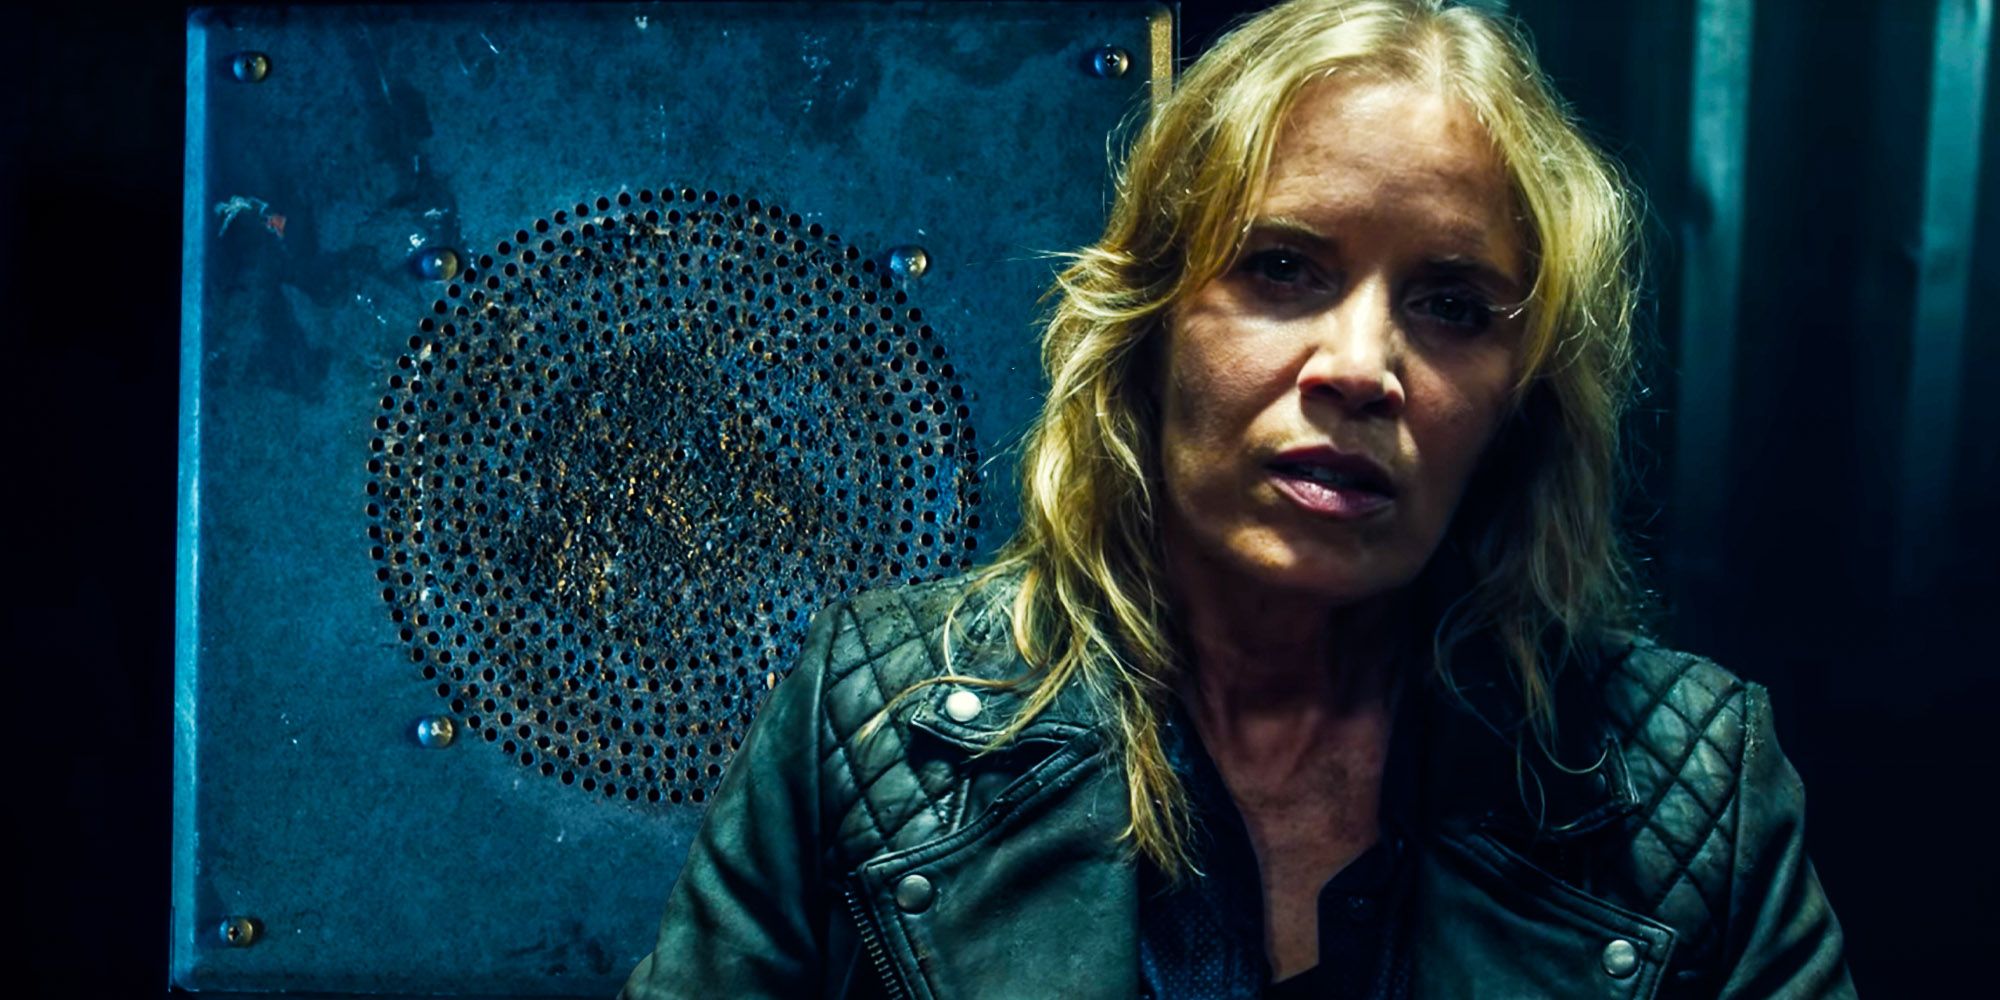 Fear the walking dead hints why Madison has not returned yet